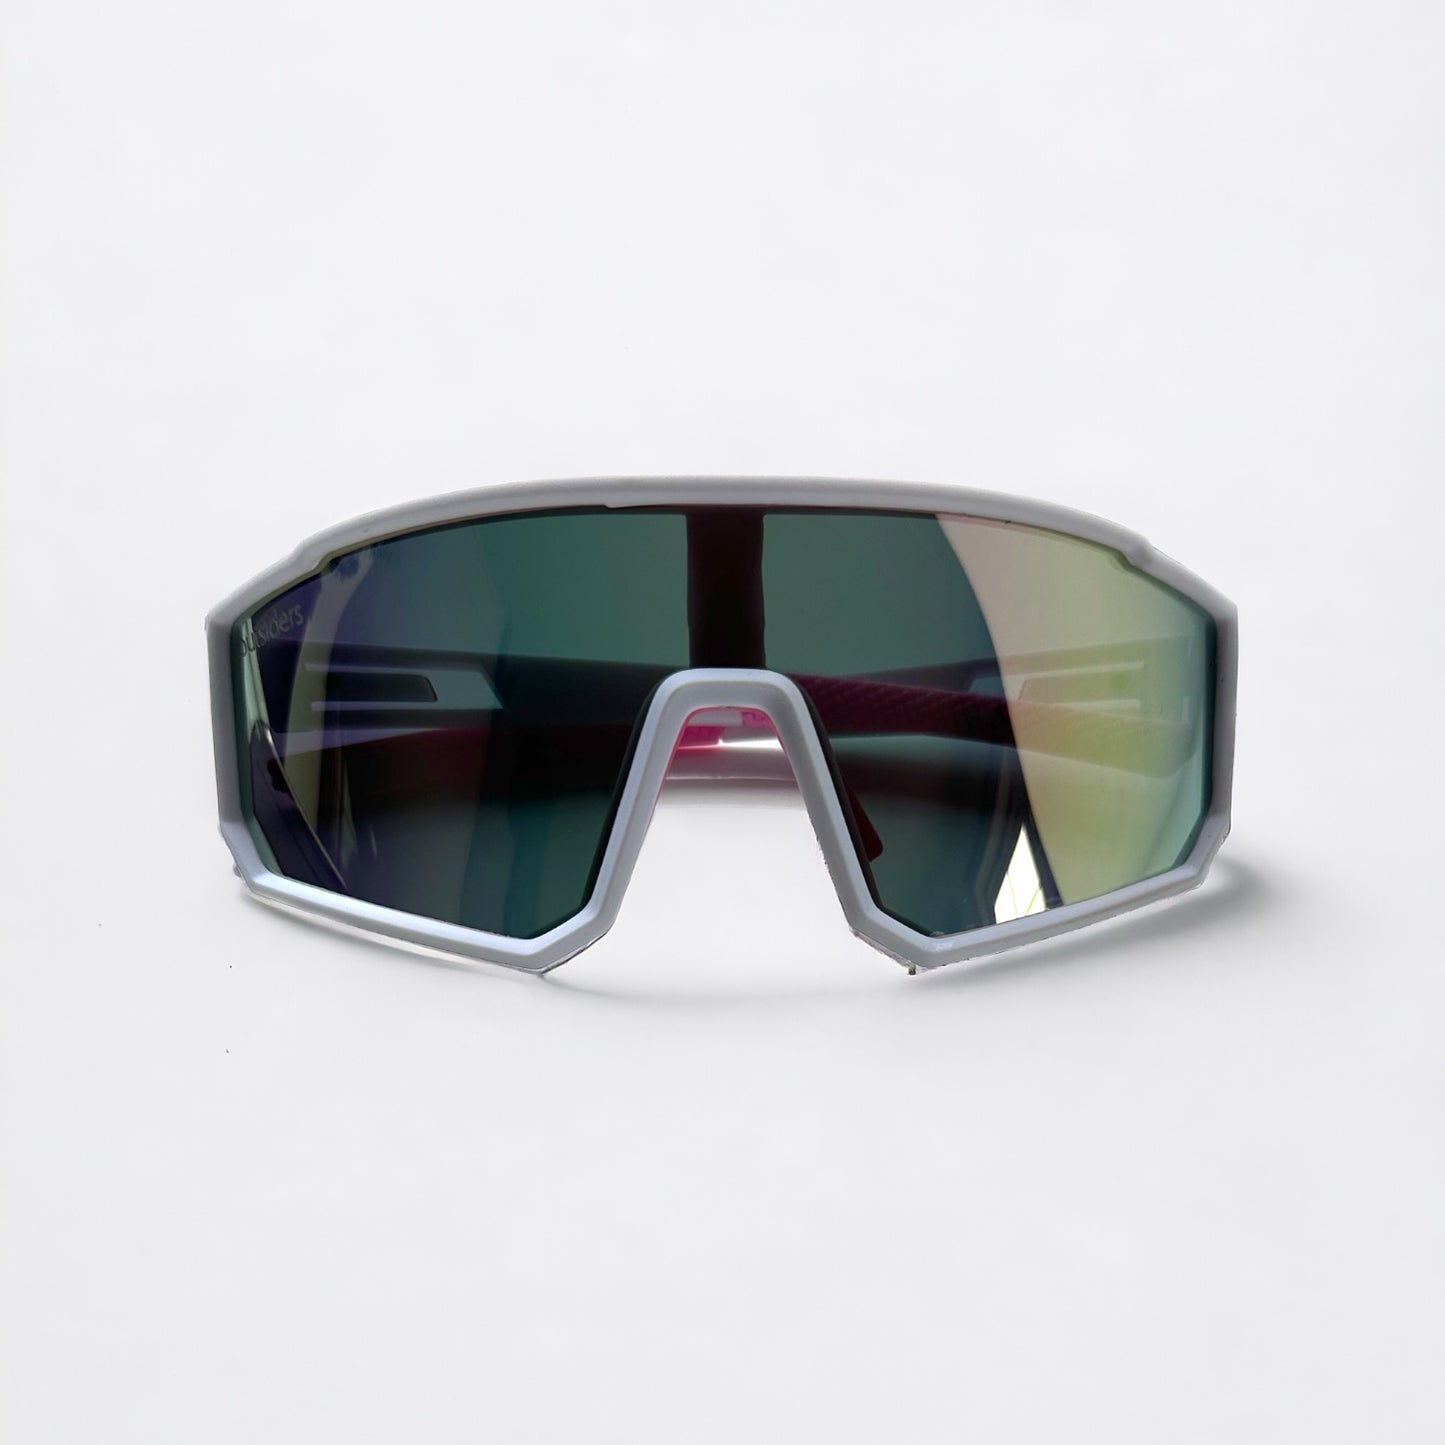 Outsiders Spaced Sunglasses - White Pink